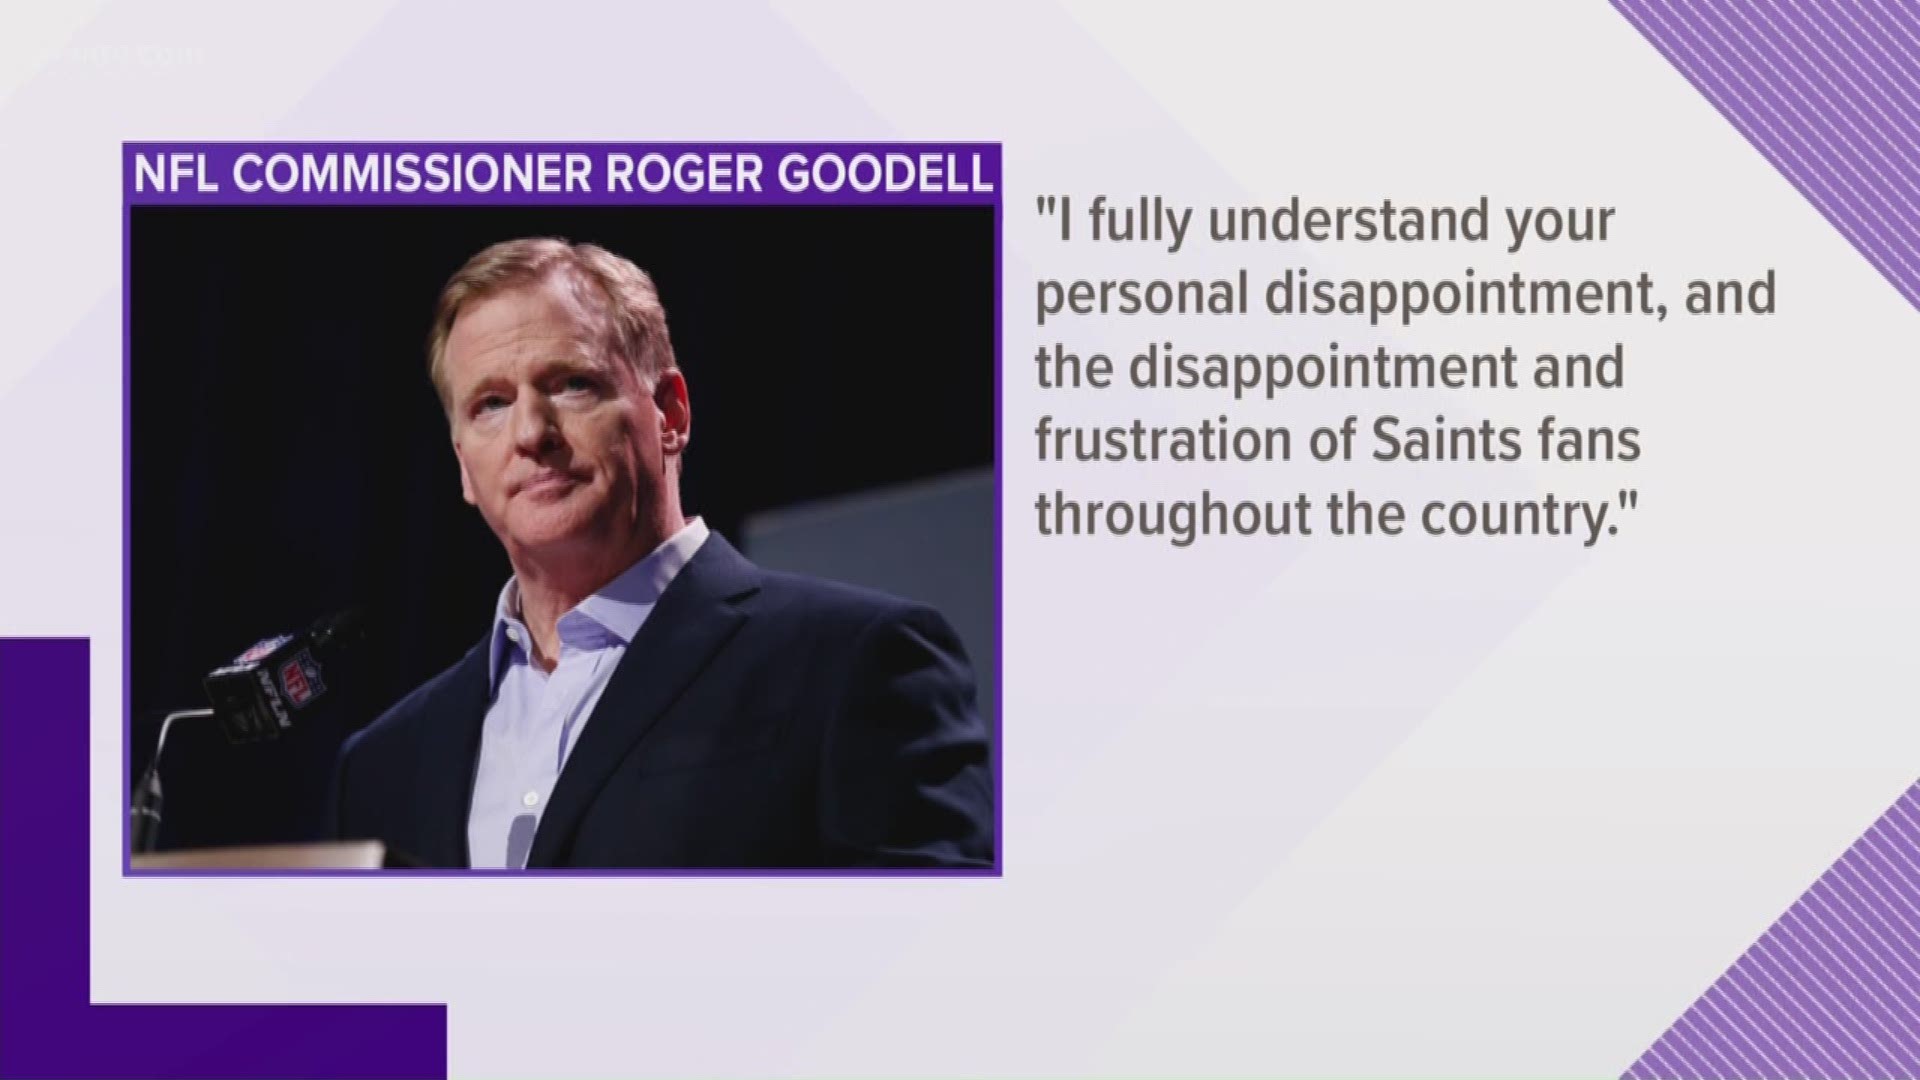 Goodell was responding to Edwards’ letter of a few weeks ago that asked the commissioner to look into the bad call that cost the Saints a chance at the Super Bowl